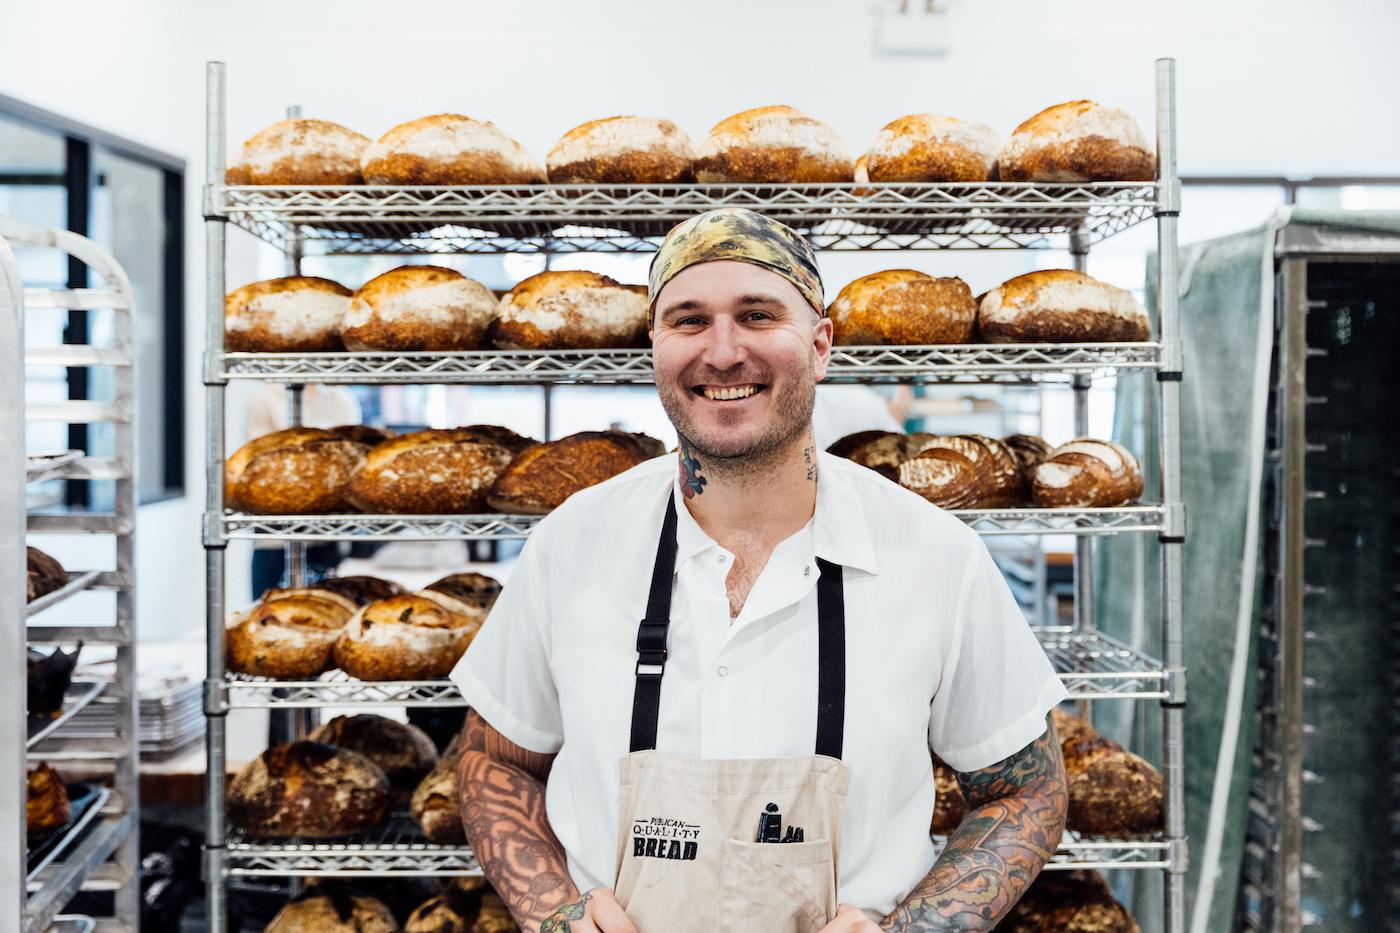 Greg Wade stands in front of a rack of cooling loaves of bread